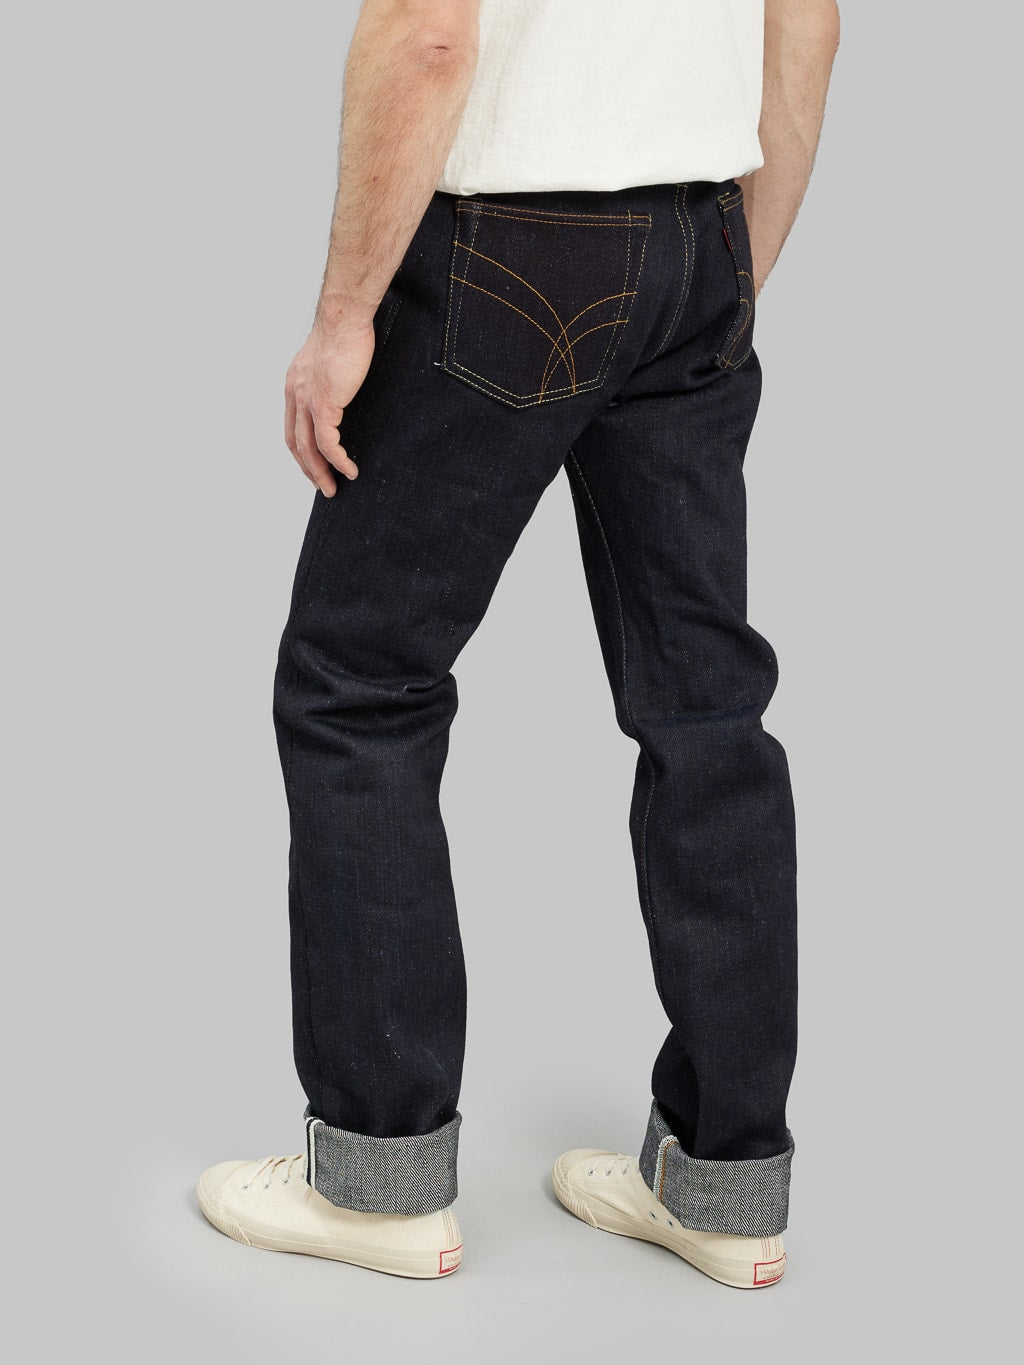 The Strike Gold Extra Heavyweight regular straight jeans back rise